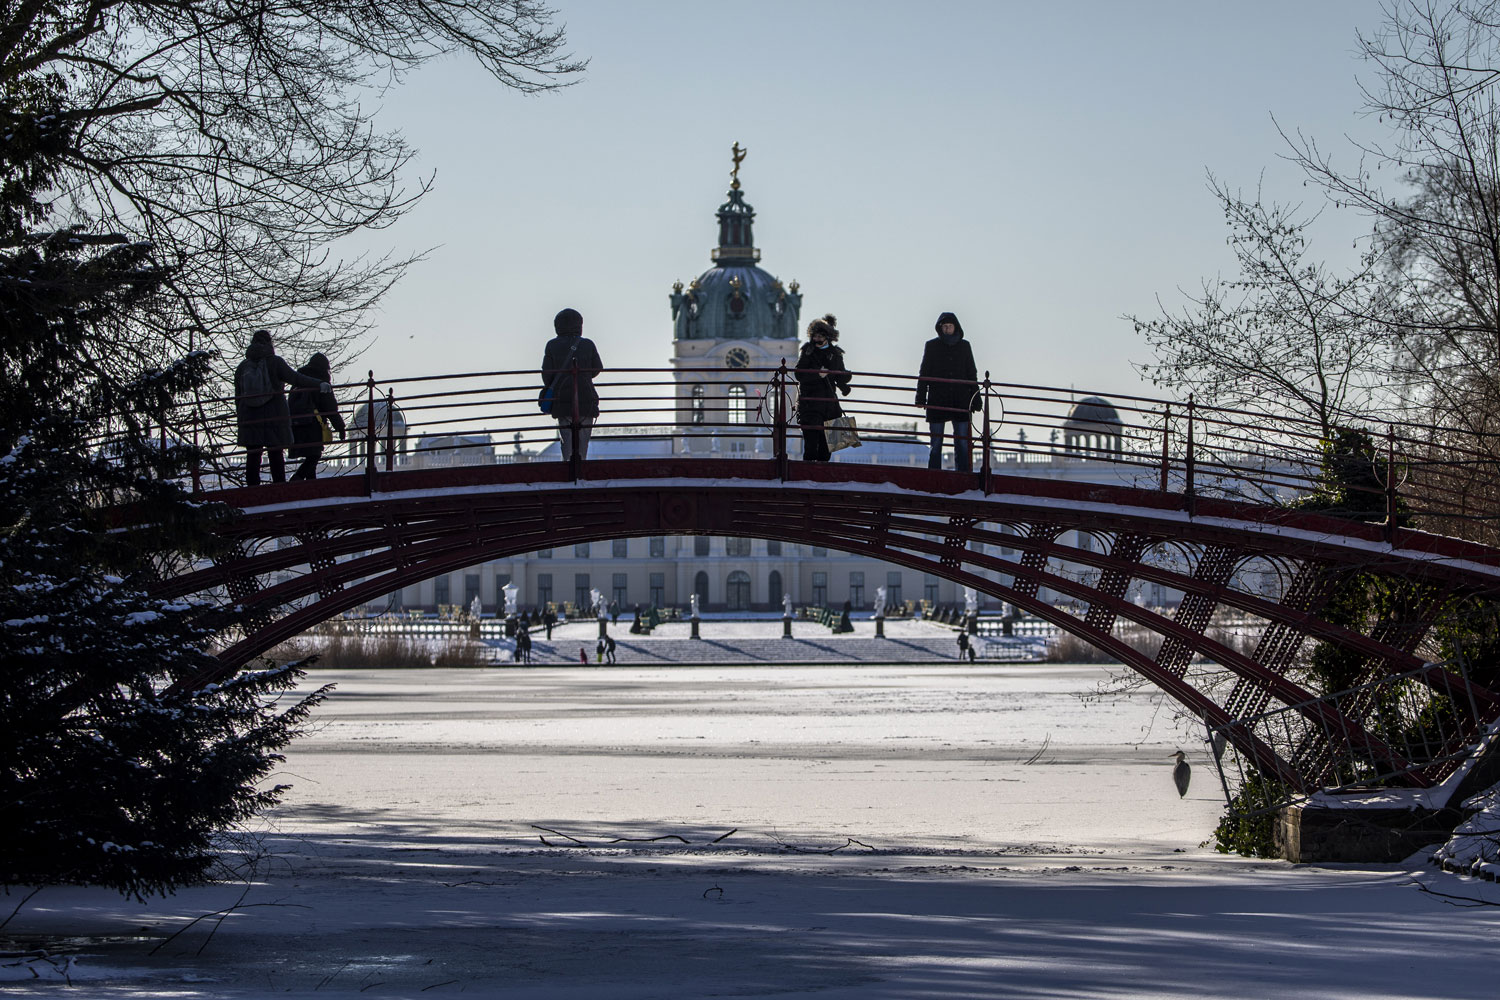 People walk in the gardens of Charlottenburg Palace covered in snow on February 12, 20211 in Berlin, Germany